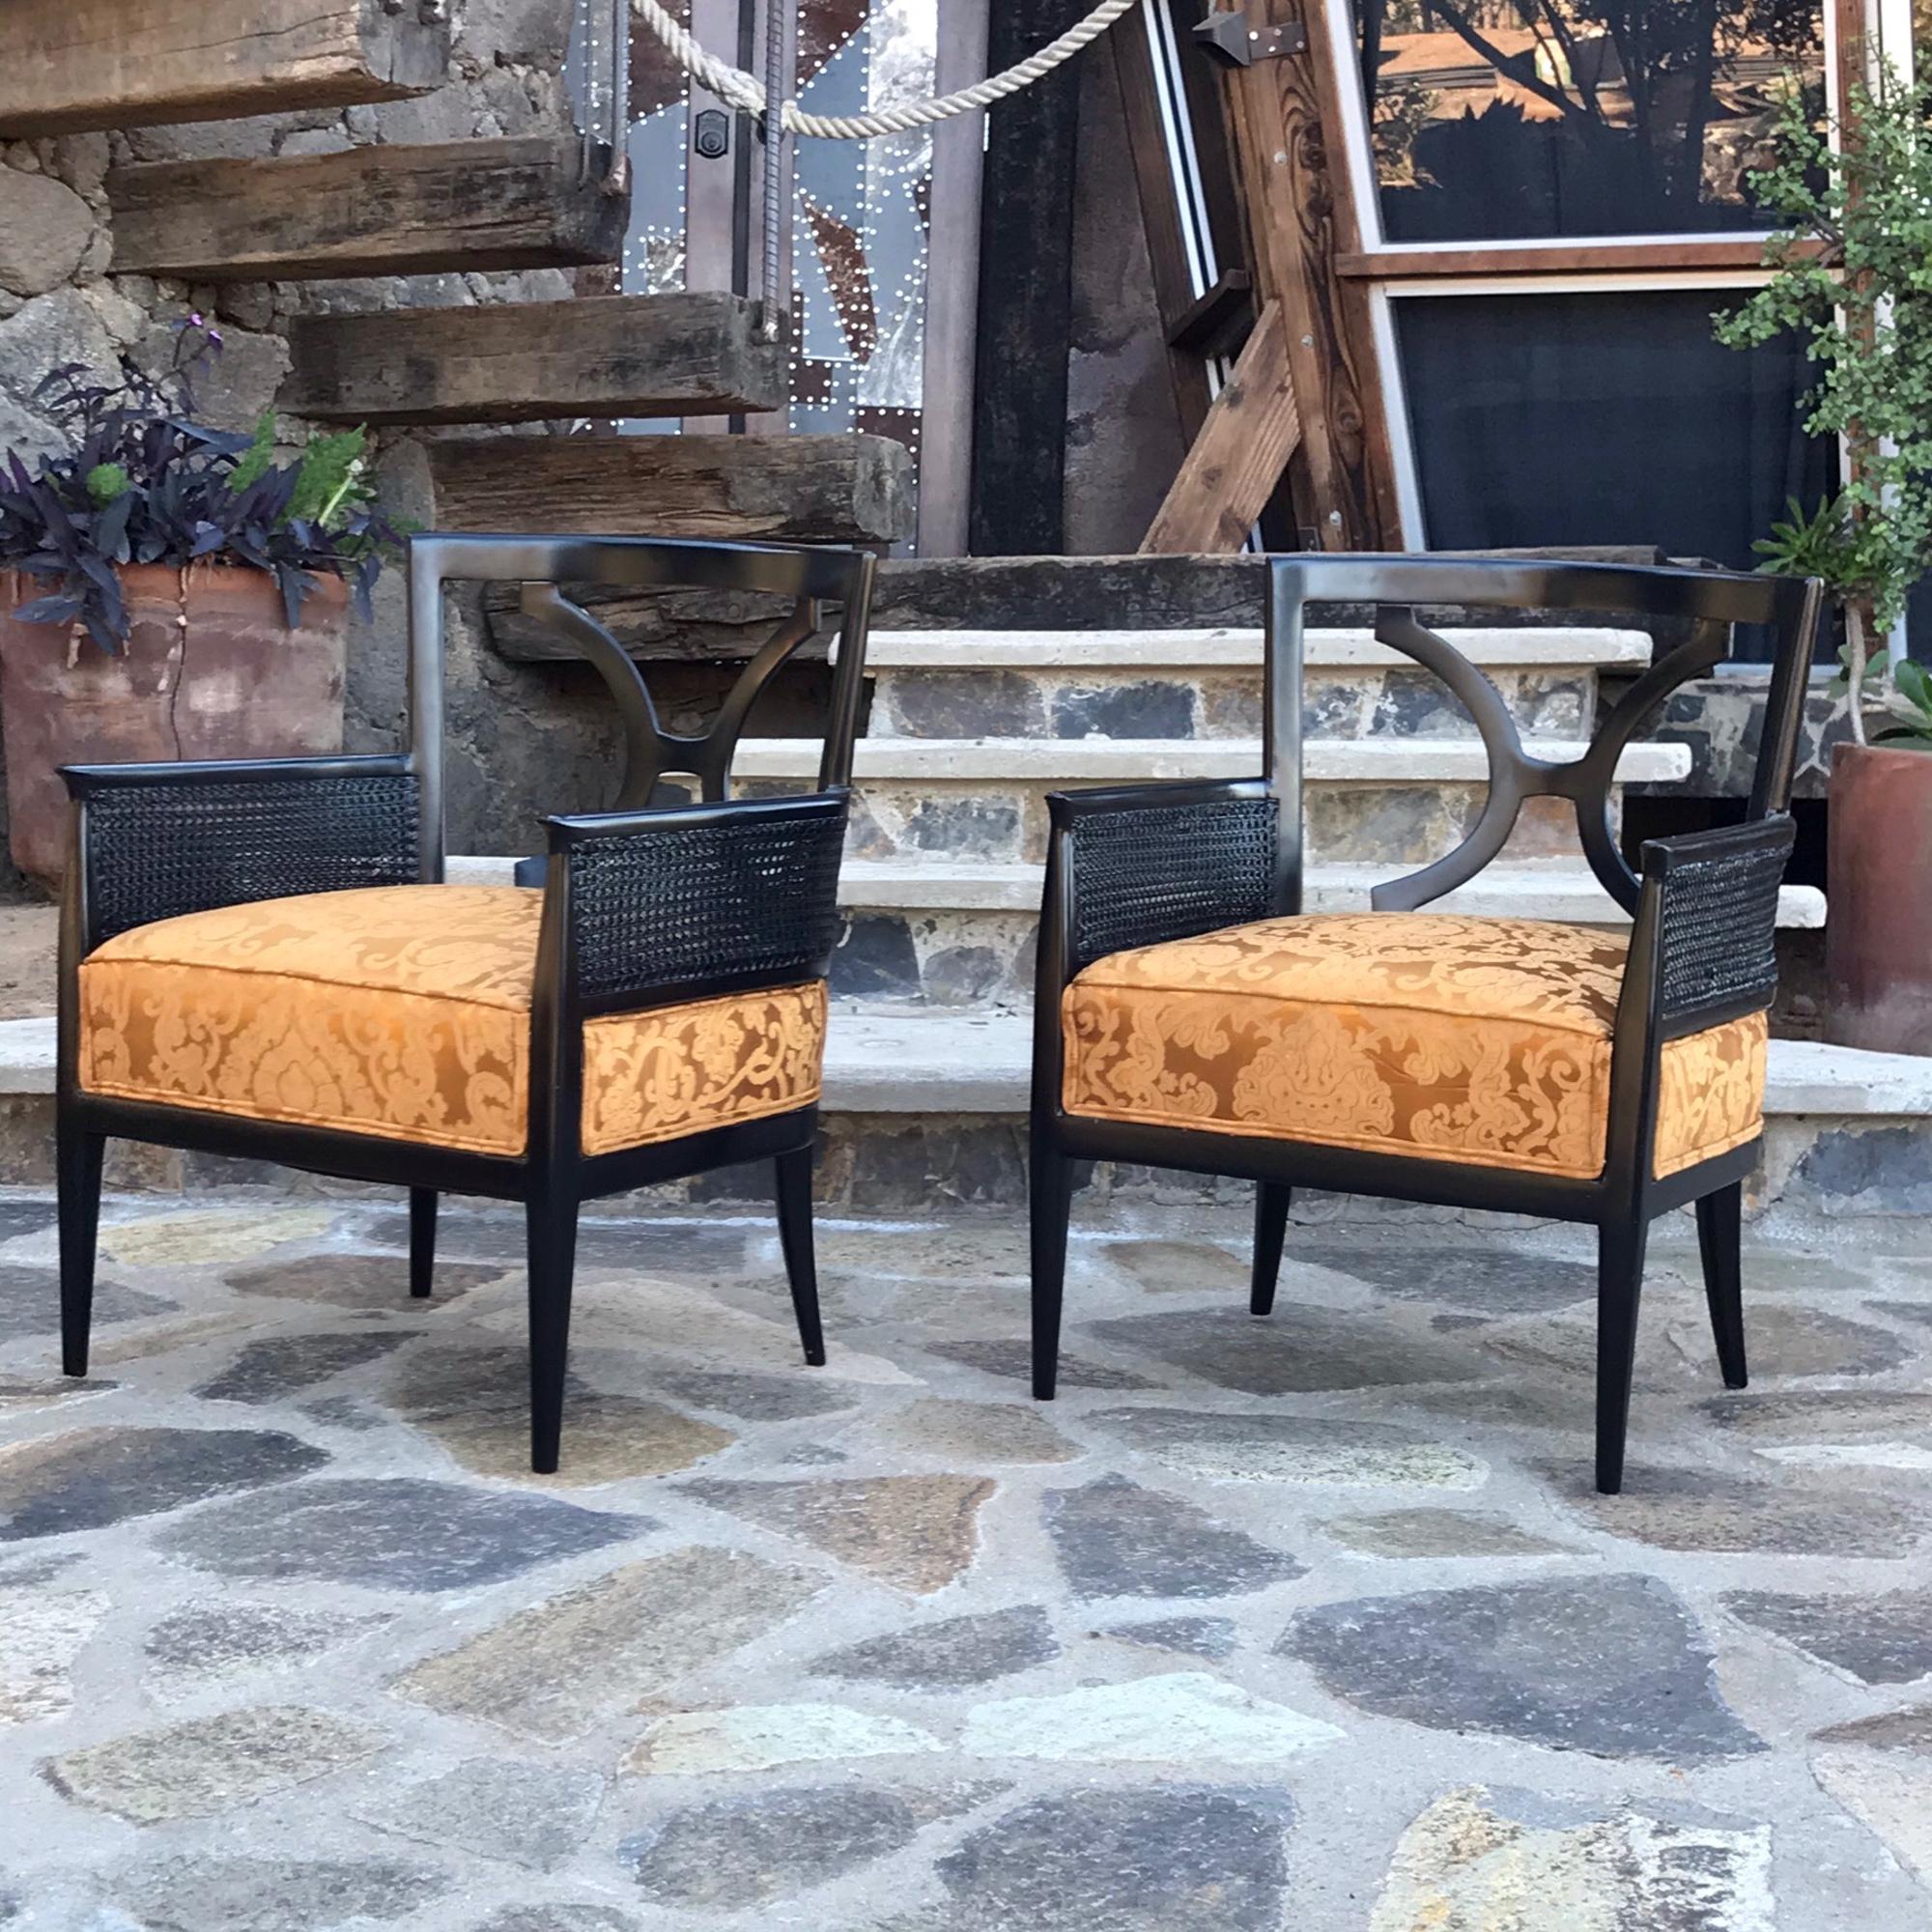 Mexican Hollywood Regency elegant pair of stately armchairs in satin black mahogany wood, sides of cane and covered in a rich gold silk brocade fabric.
No maker label available. 
Presents in the style of Roberto & Mito Block for Mexican Modernism